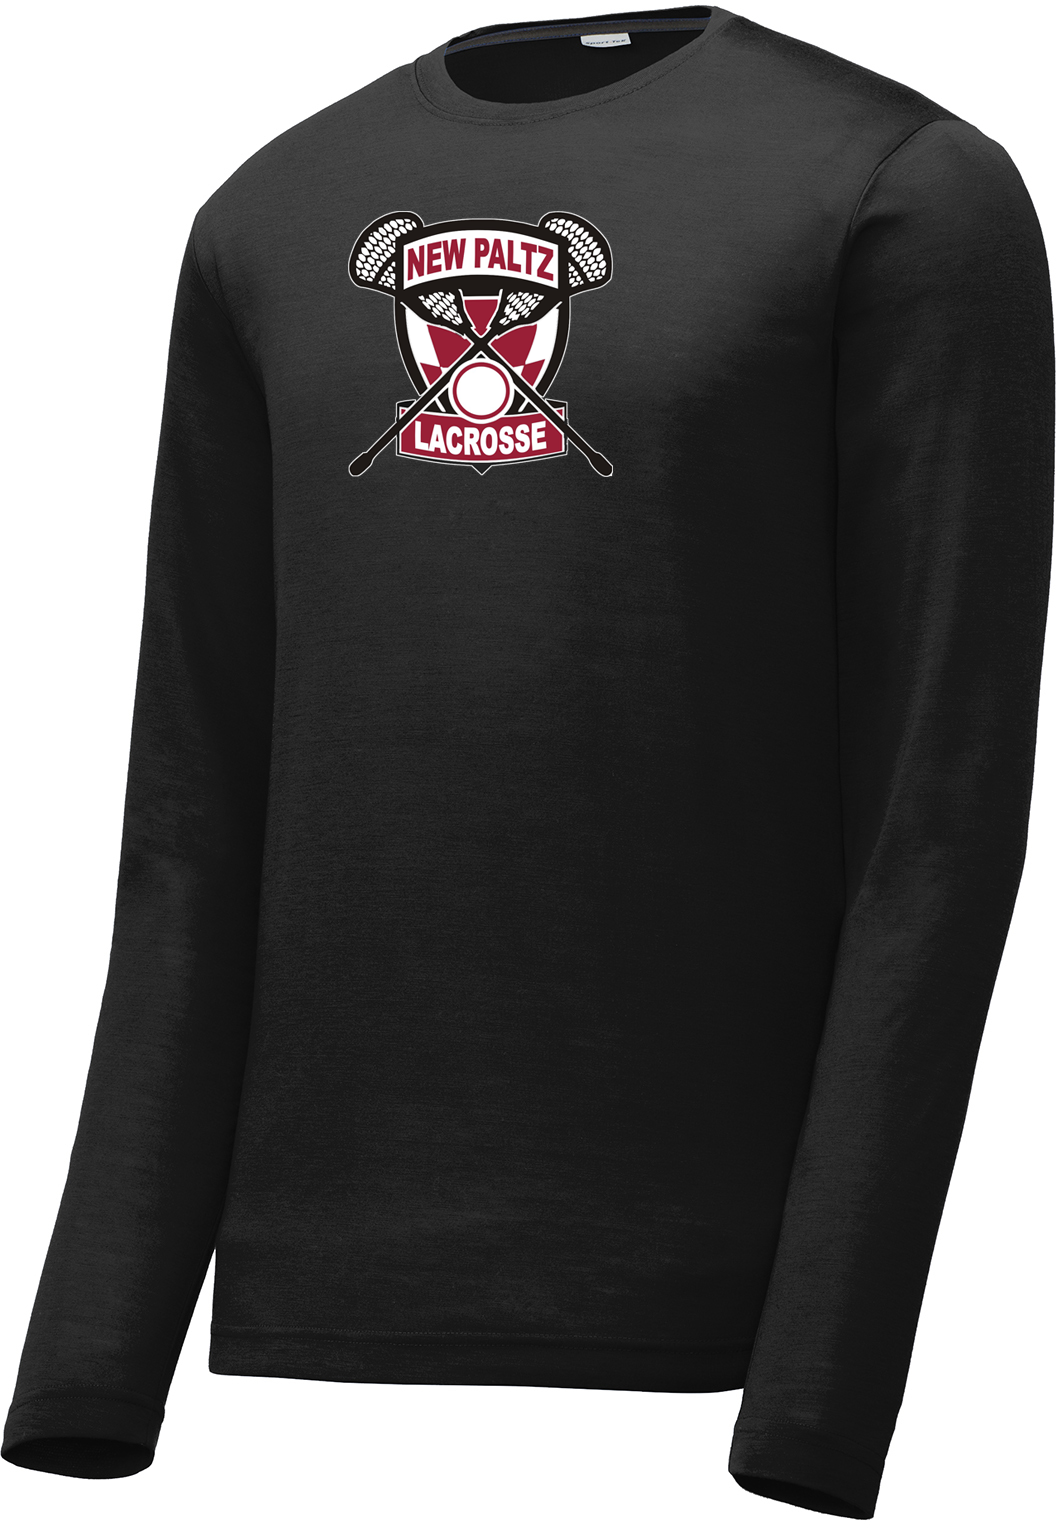 New Paltz Youth Lacrosse Long Sleeve CottonTouch Performance Shirt